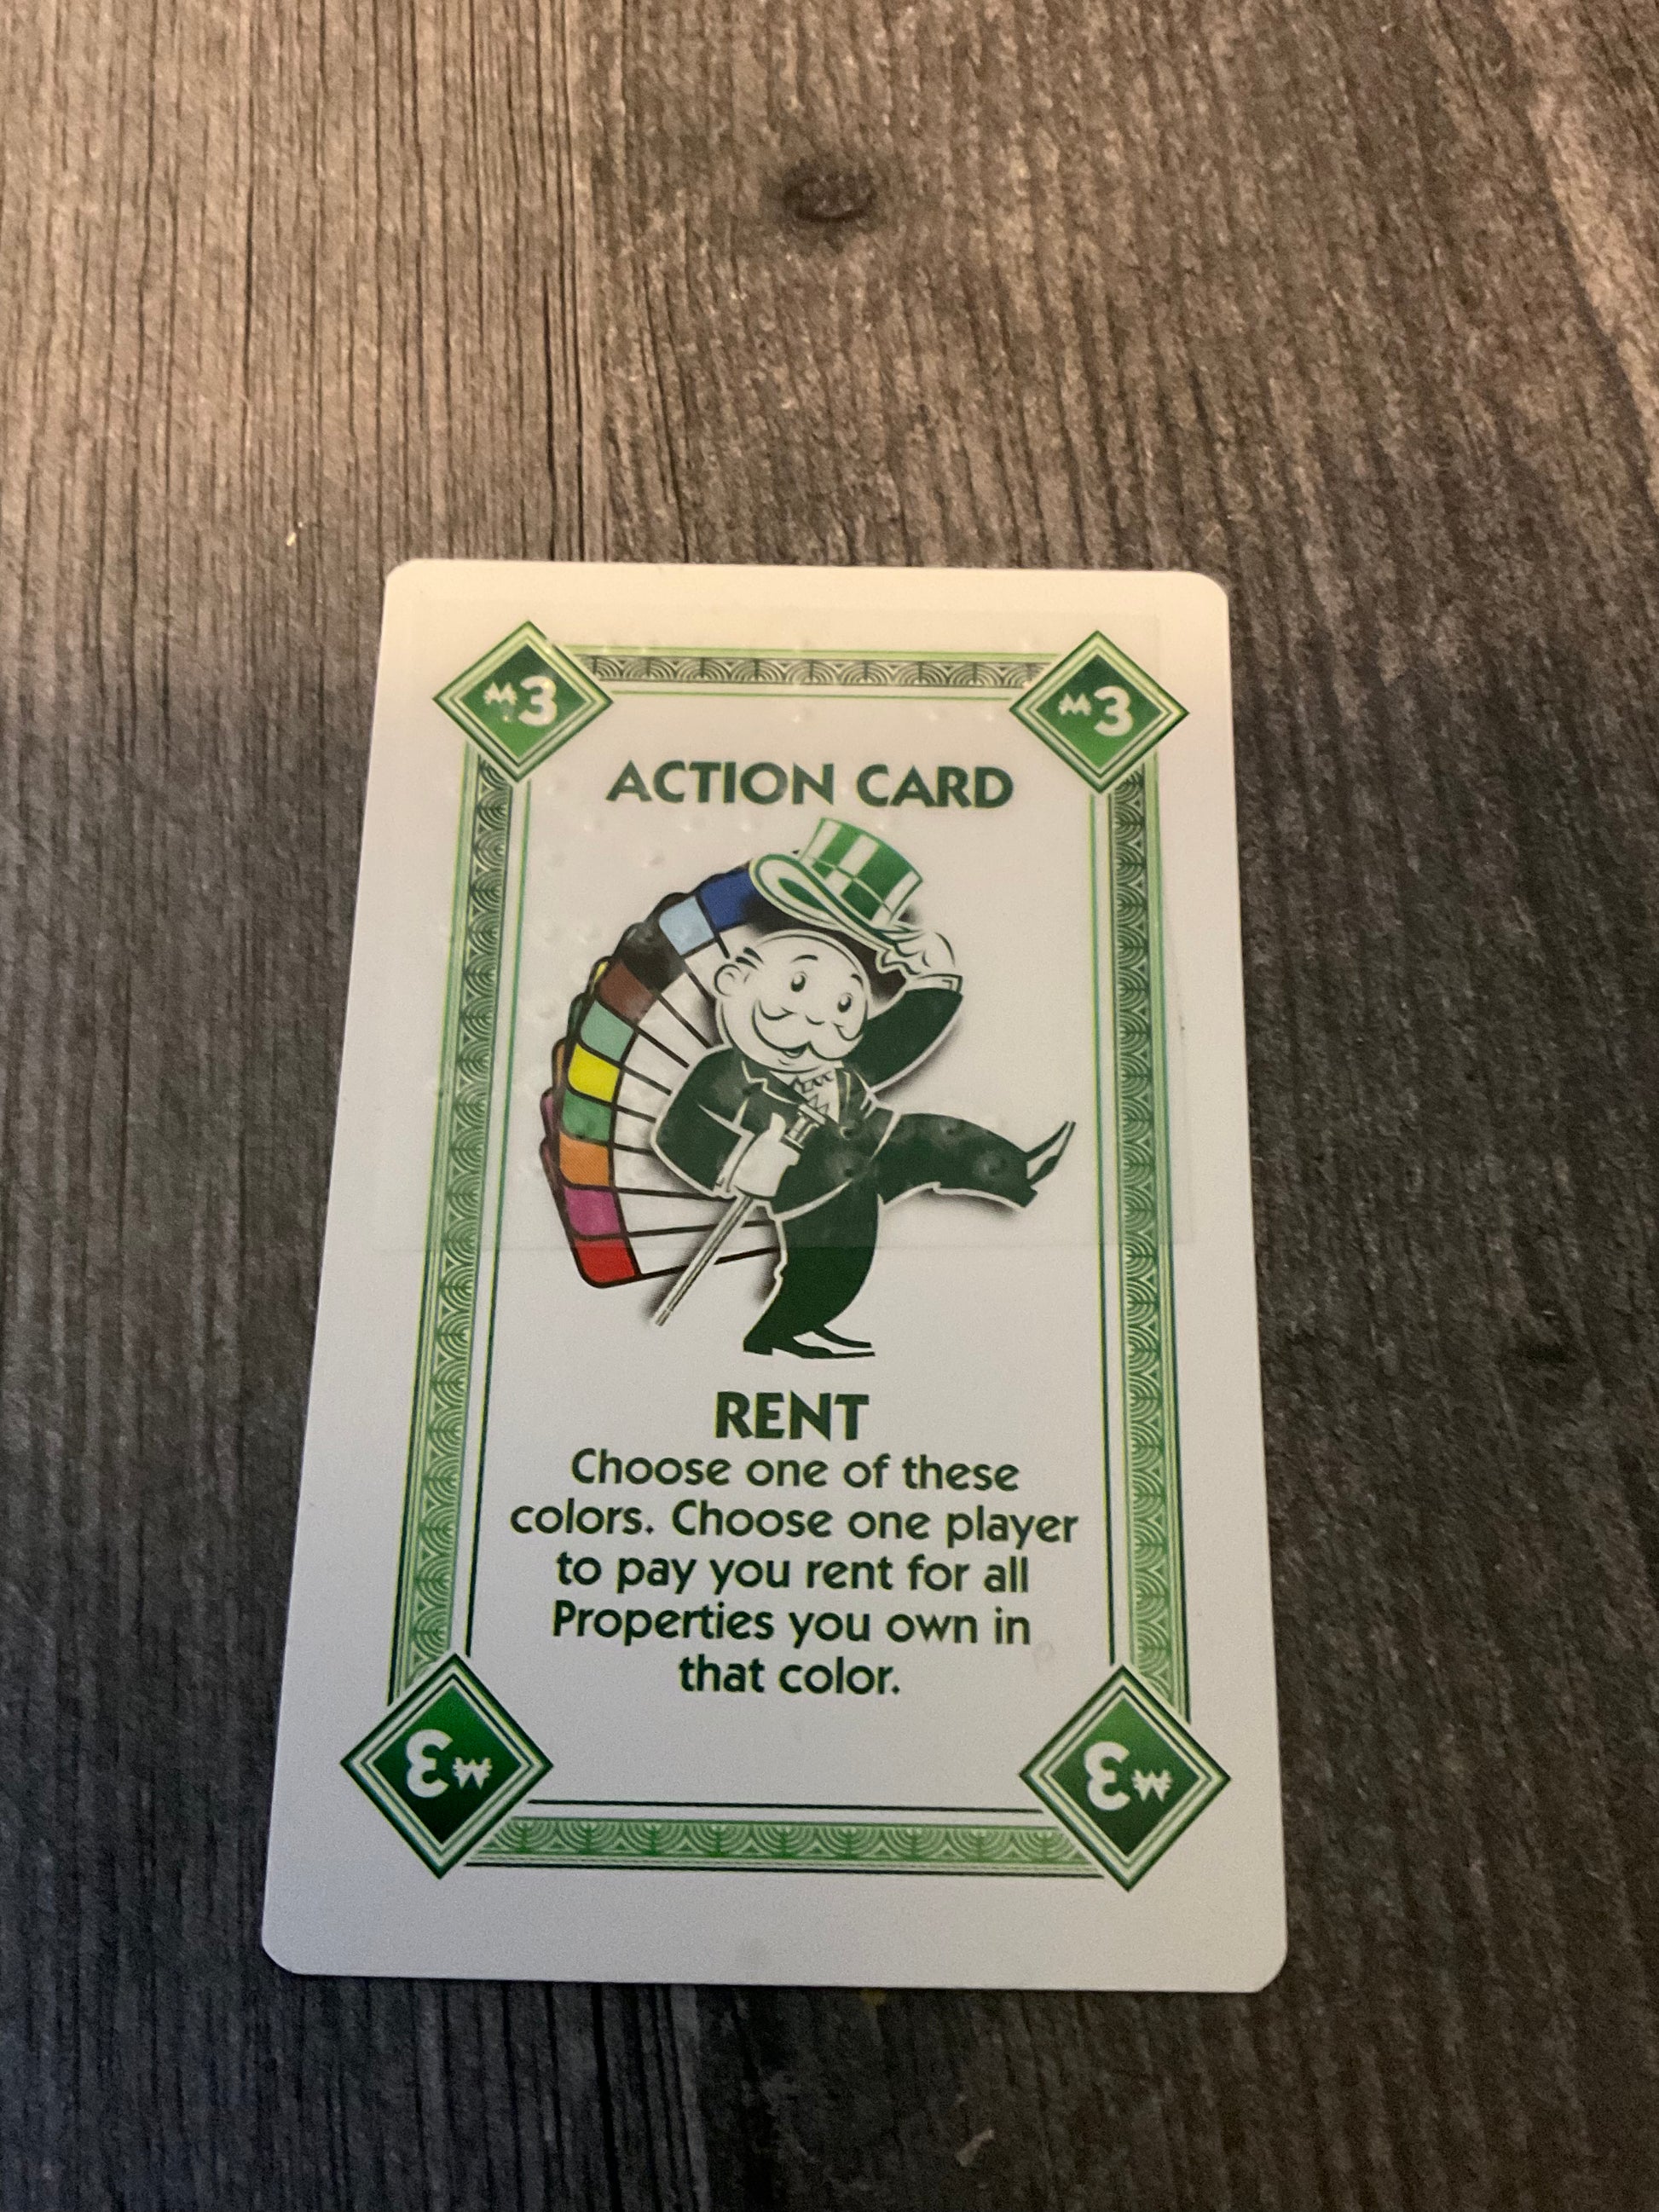 Image of a rent card